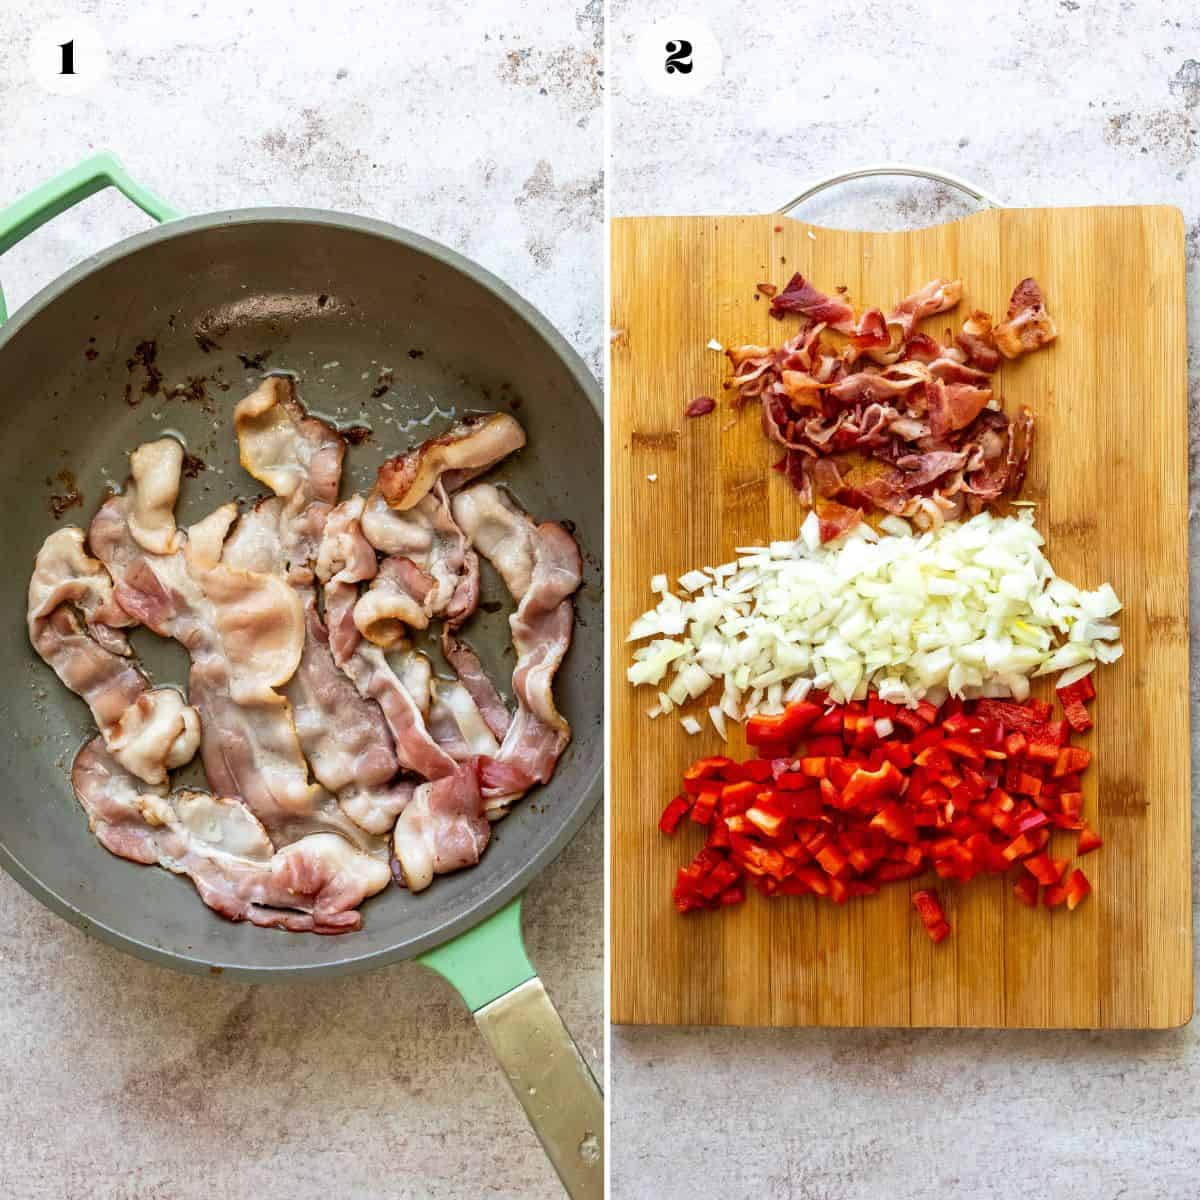 An overhead image of a collage of two photos. On the left side, bacon is being fried on a skillet. On the right side, the photo shows chopped onions, bell pepper, and garlic on a chopping board.